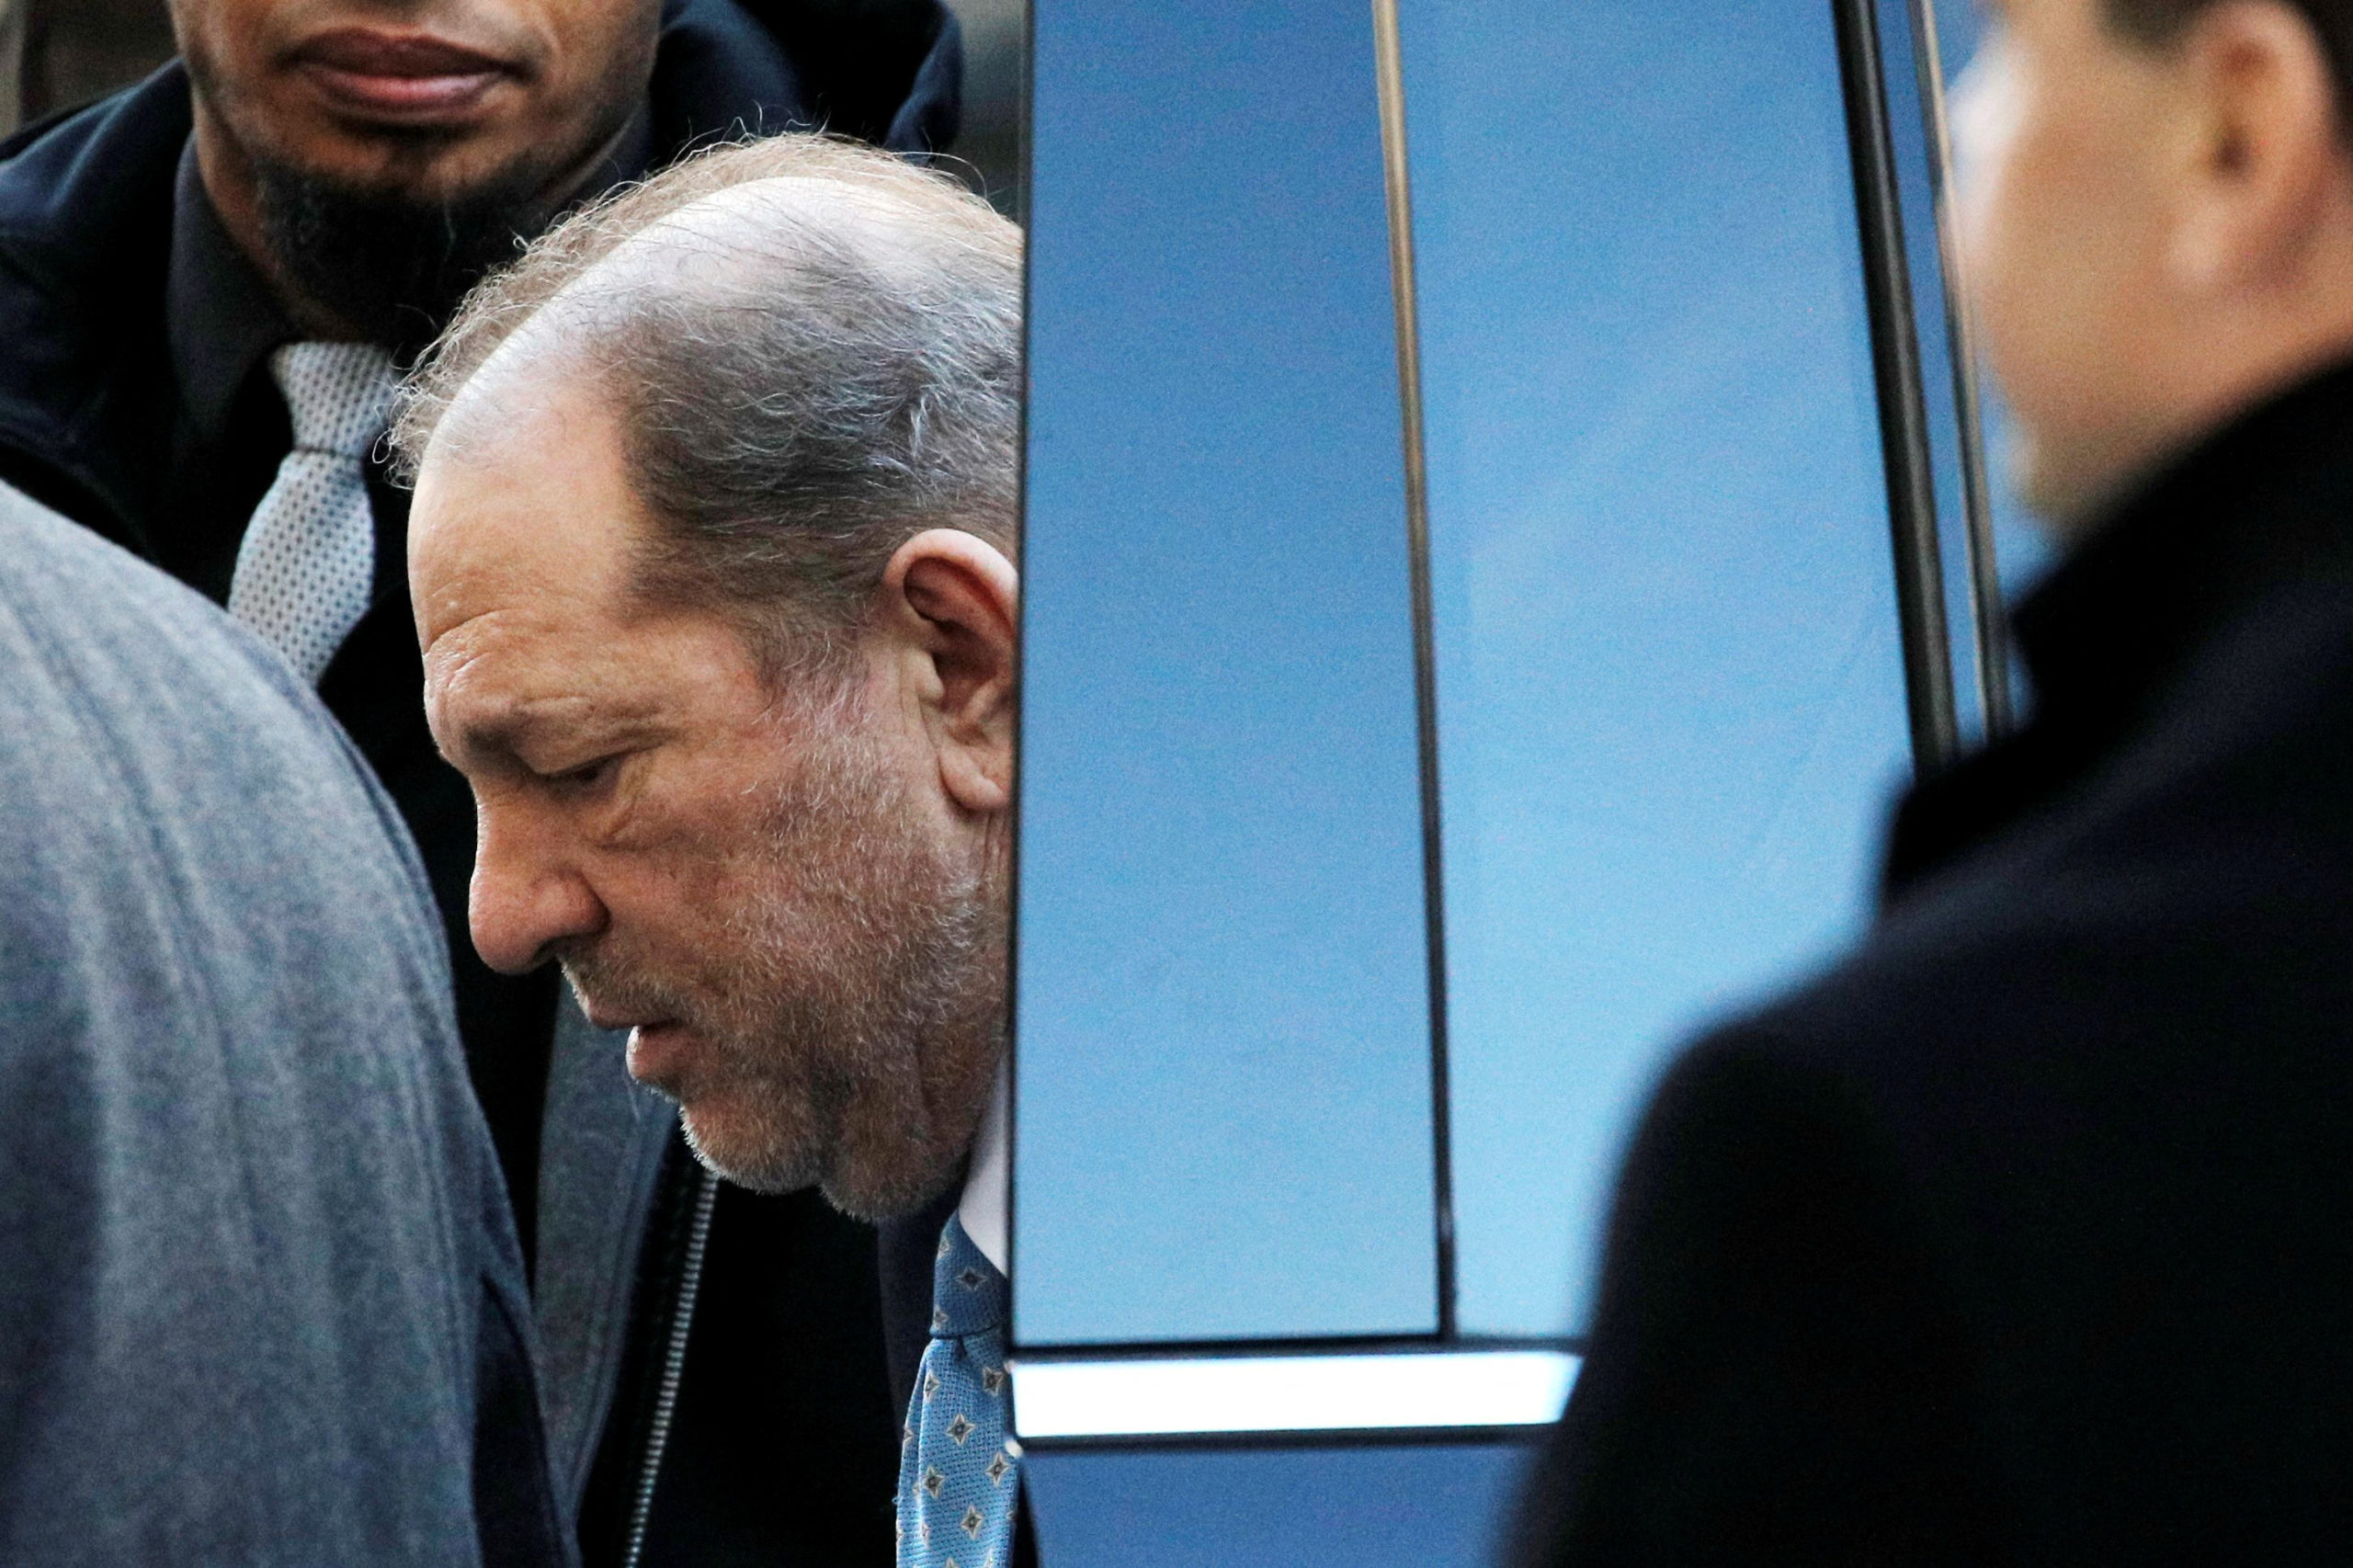 Former movie producer Harvey Weinstein has been found guilty of rape by the Los Angeles Superior Court.